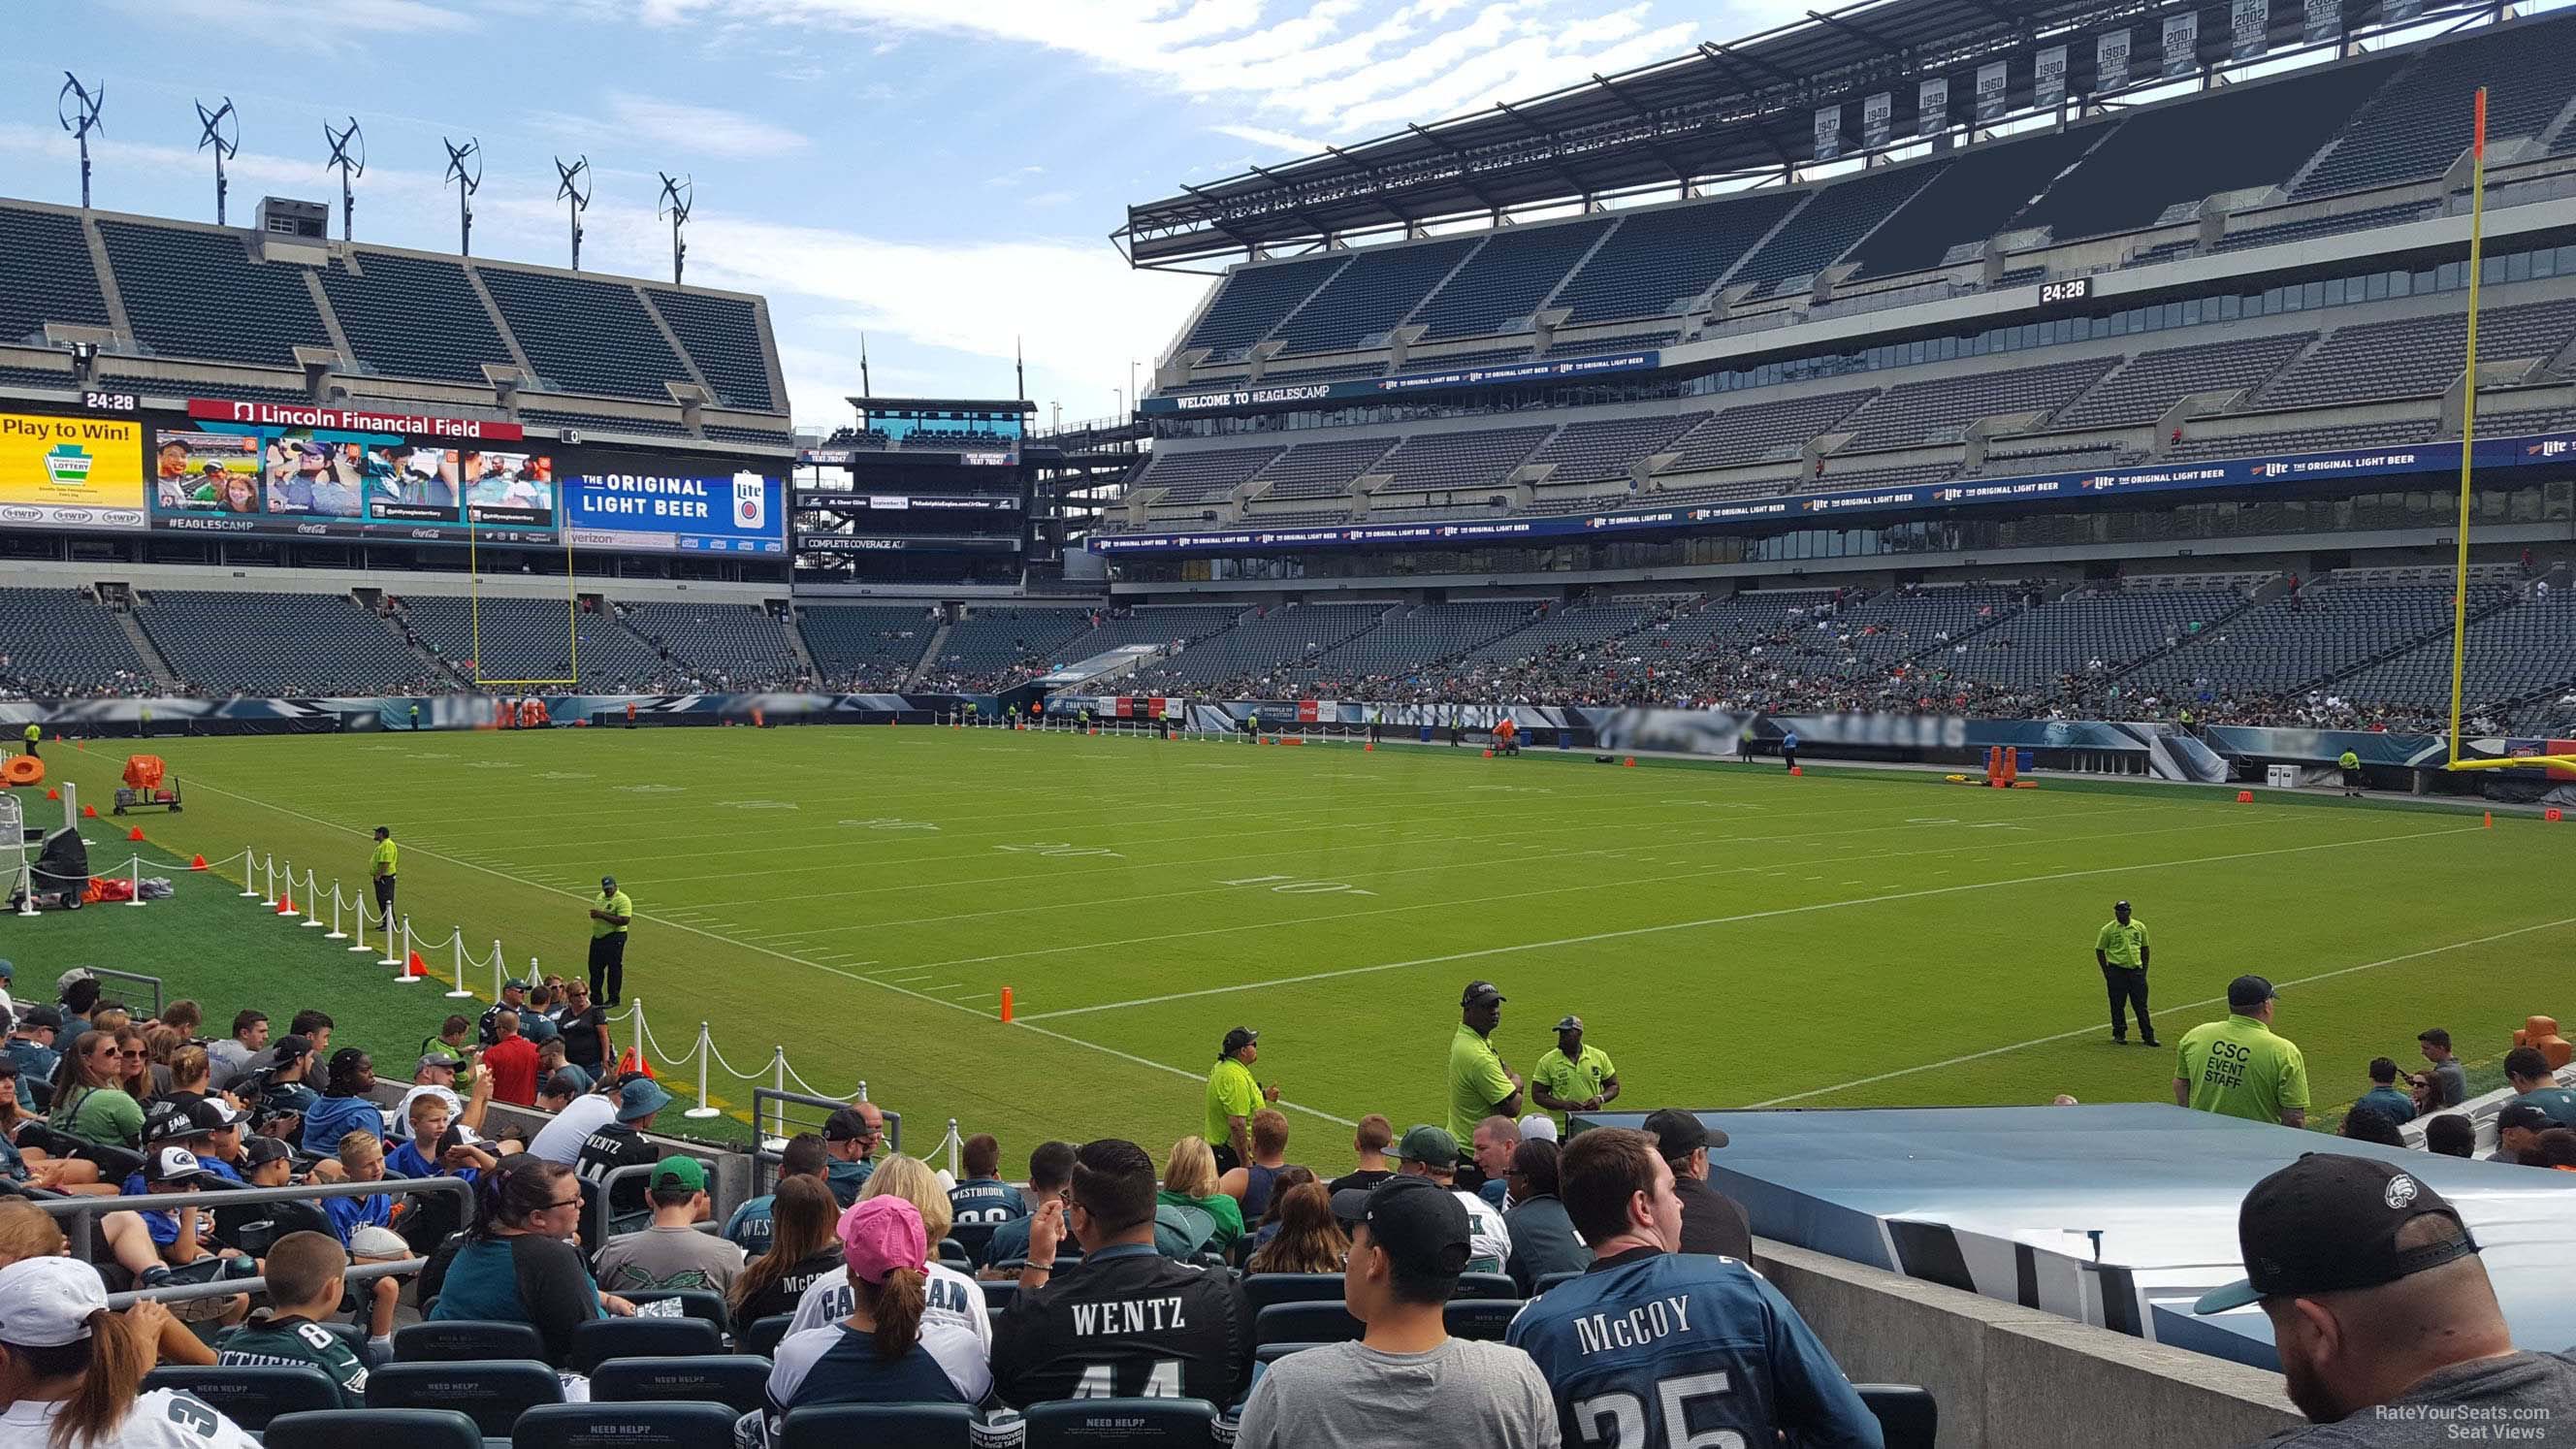 section 107, row 12 seat view  for football - lincoln financial field